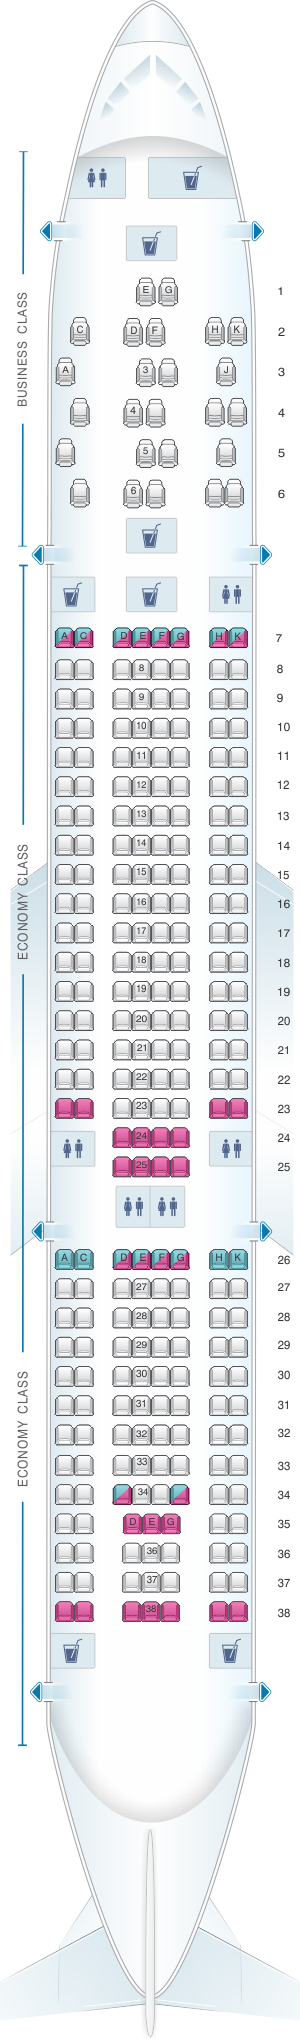 Seat map for TAP Air Portugal Airbus A330 200 V2